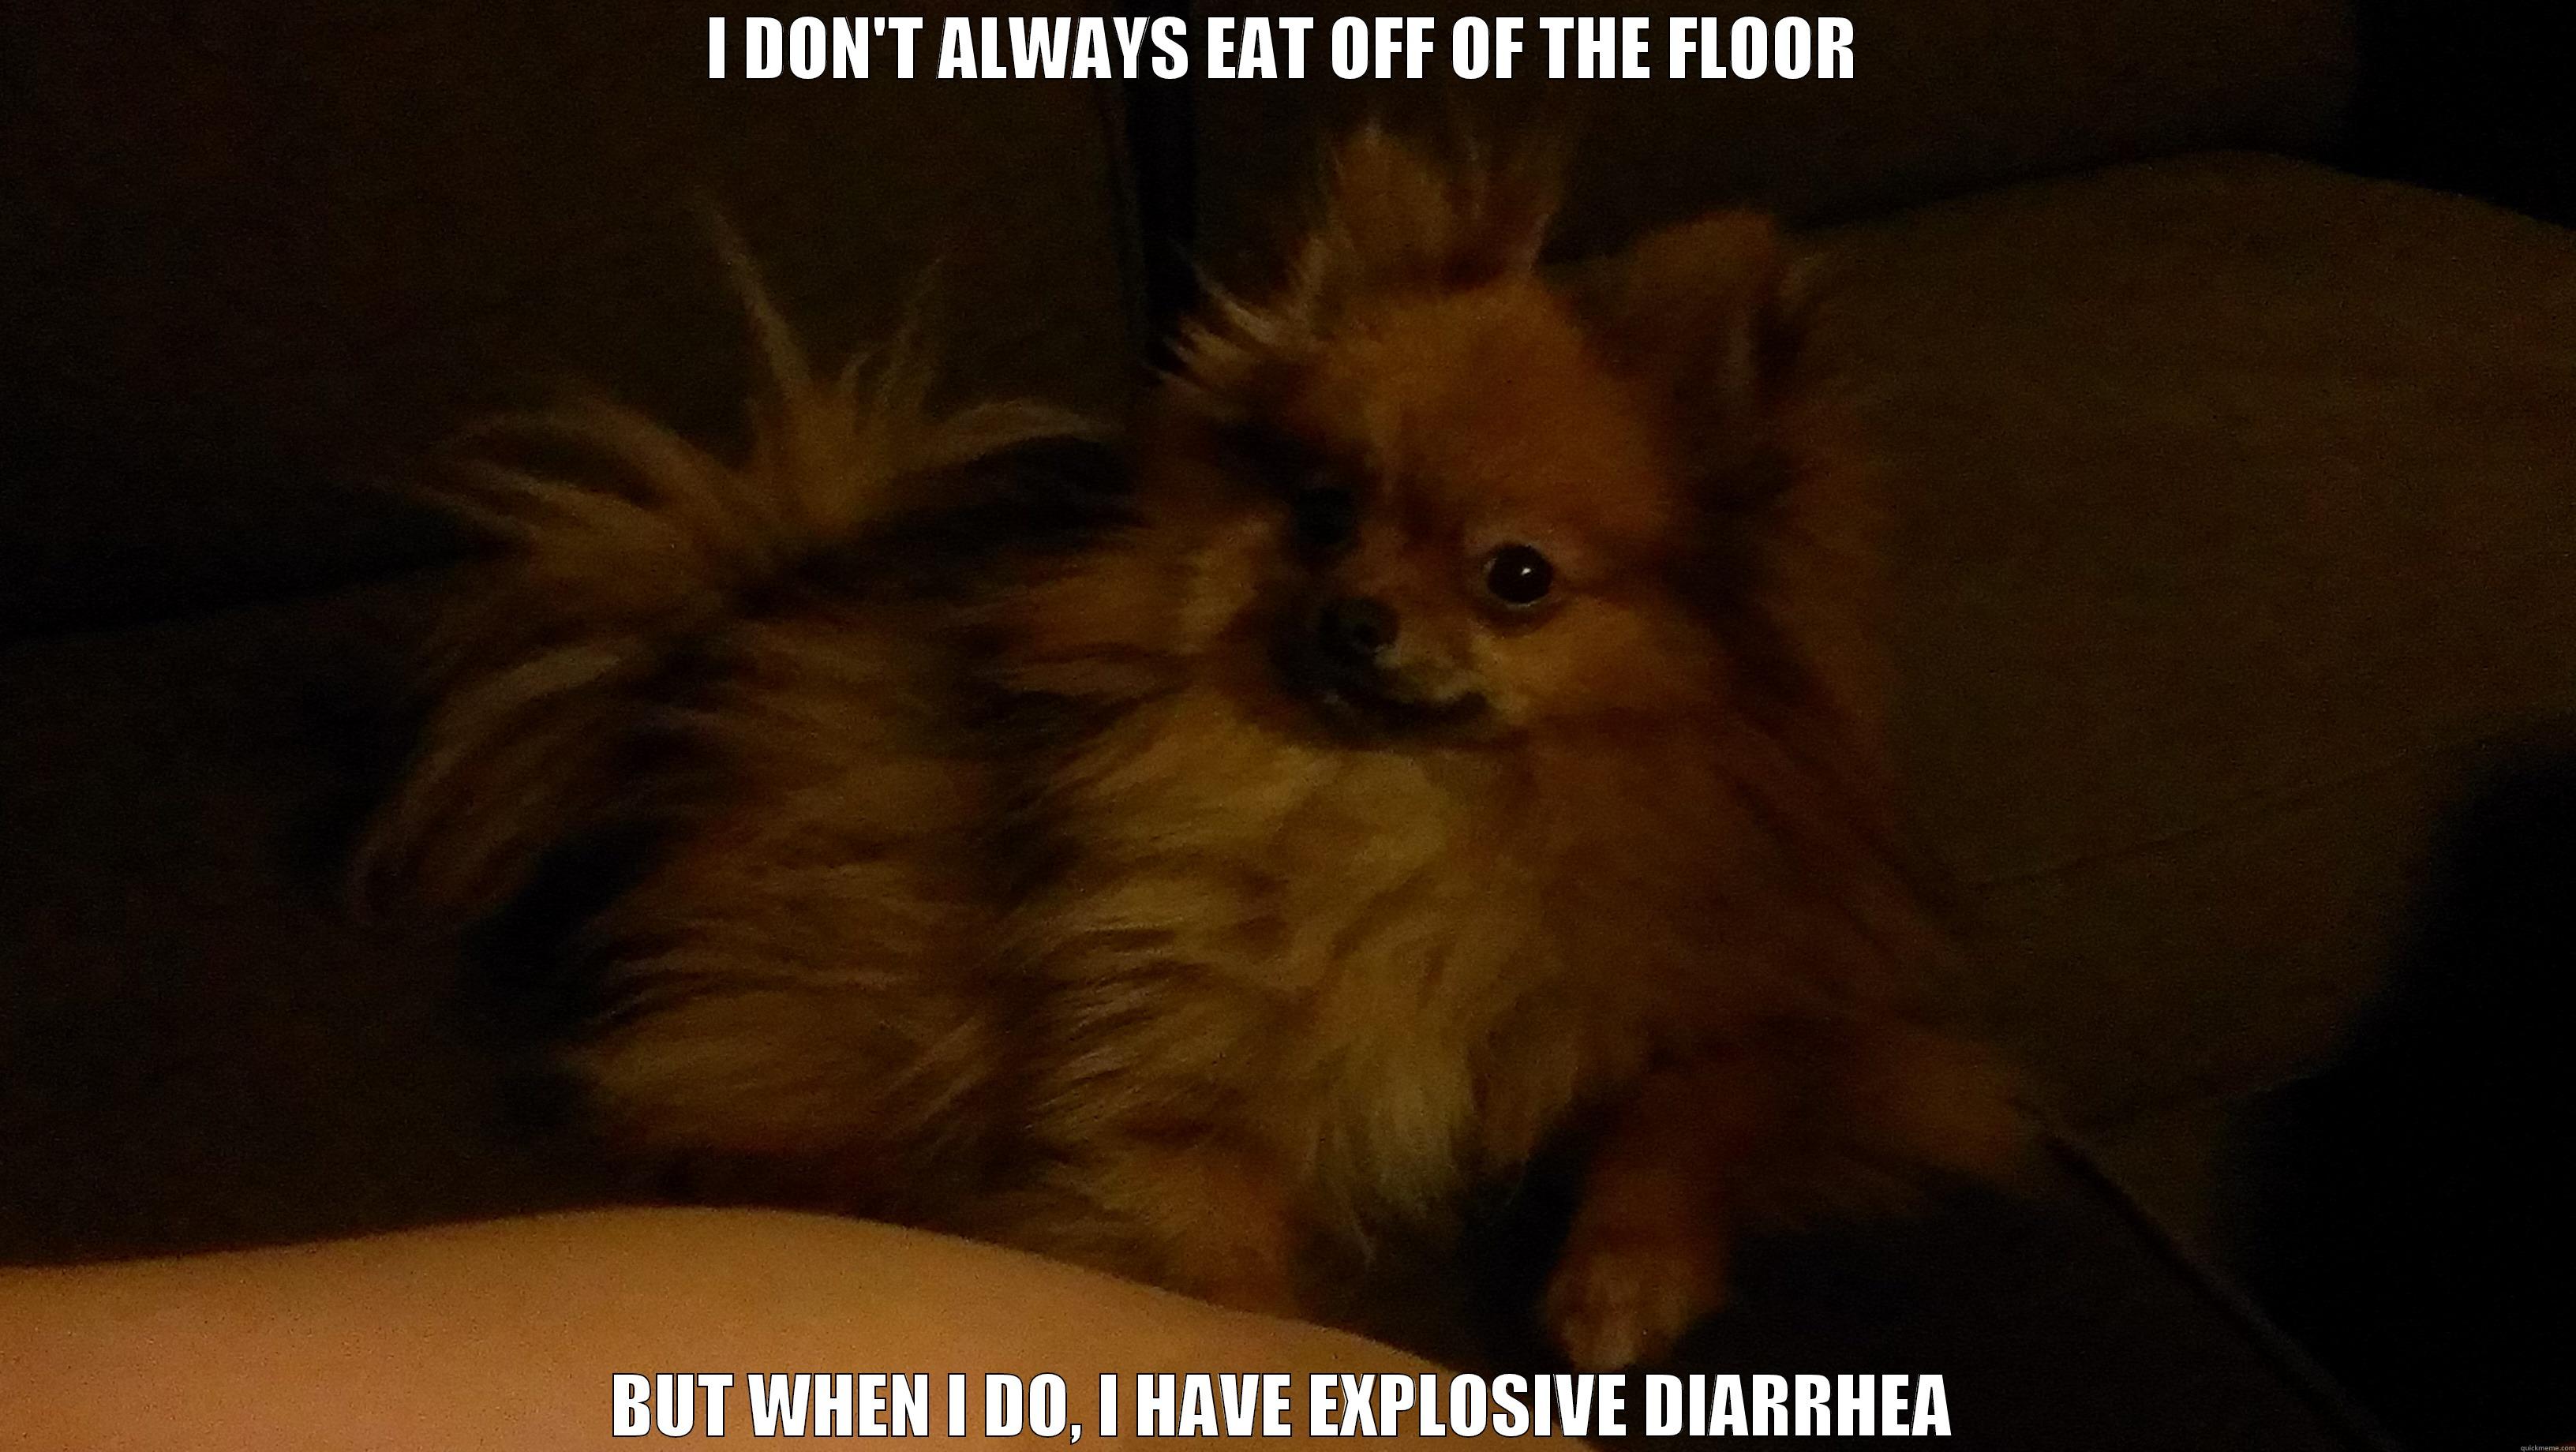 bandito eato - I DON'T ALWAYS EAT OFF OF THE FLOOR BUT WHEN I DO, I HAVE EXPLOSIVE DIARRHEA Misc